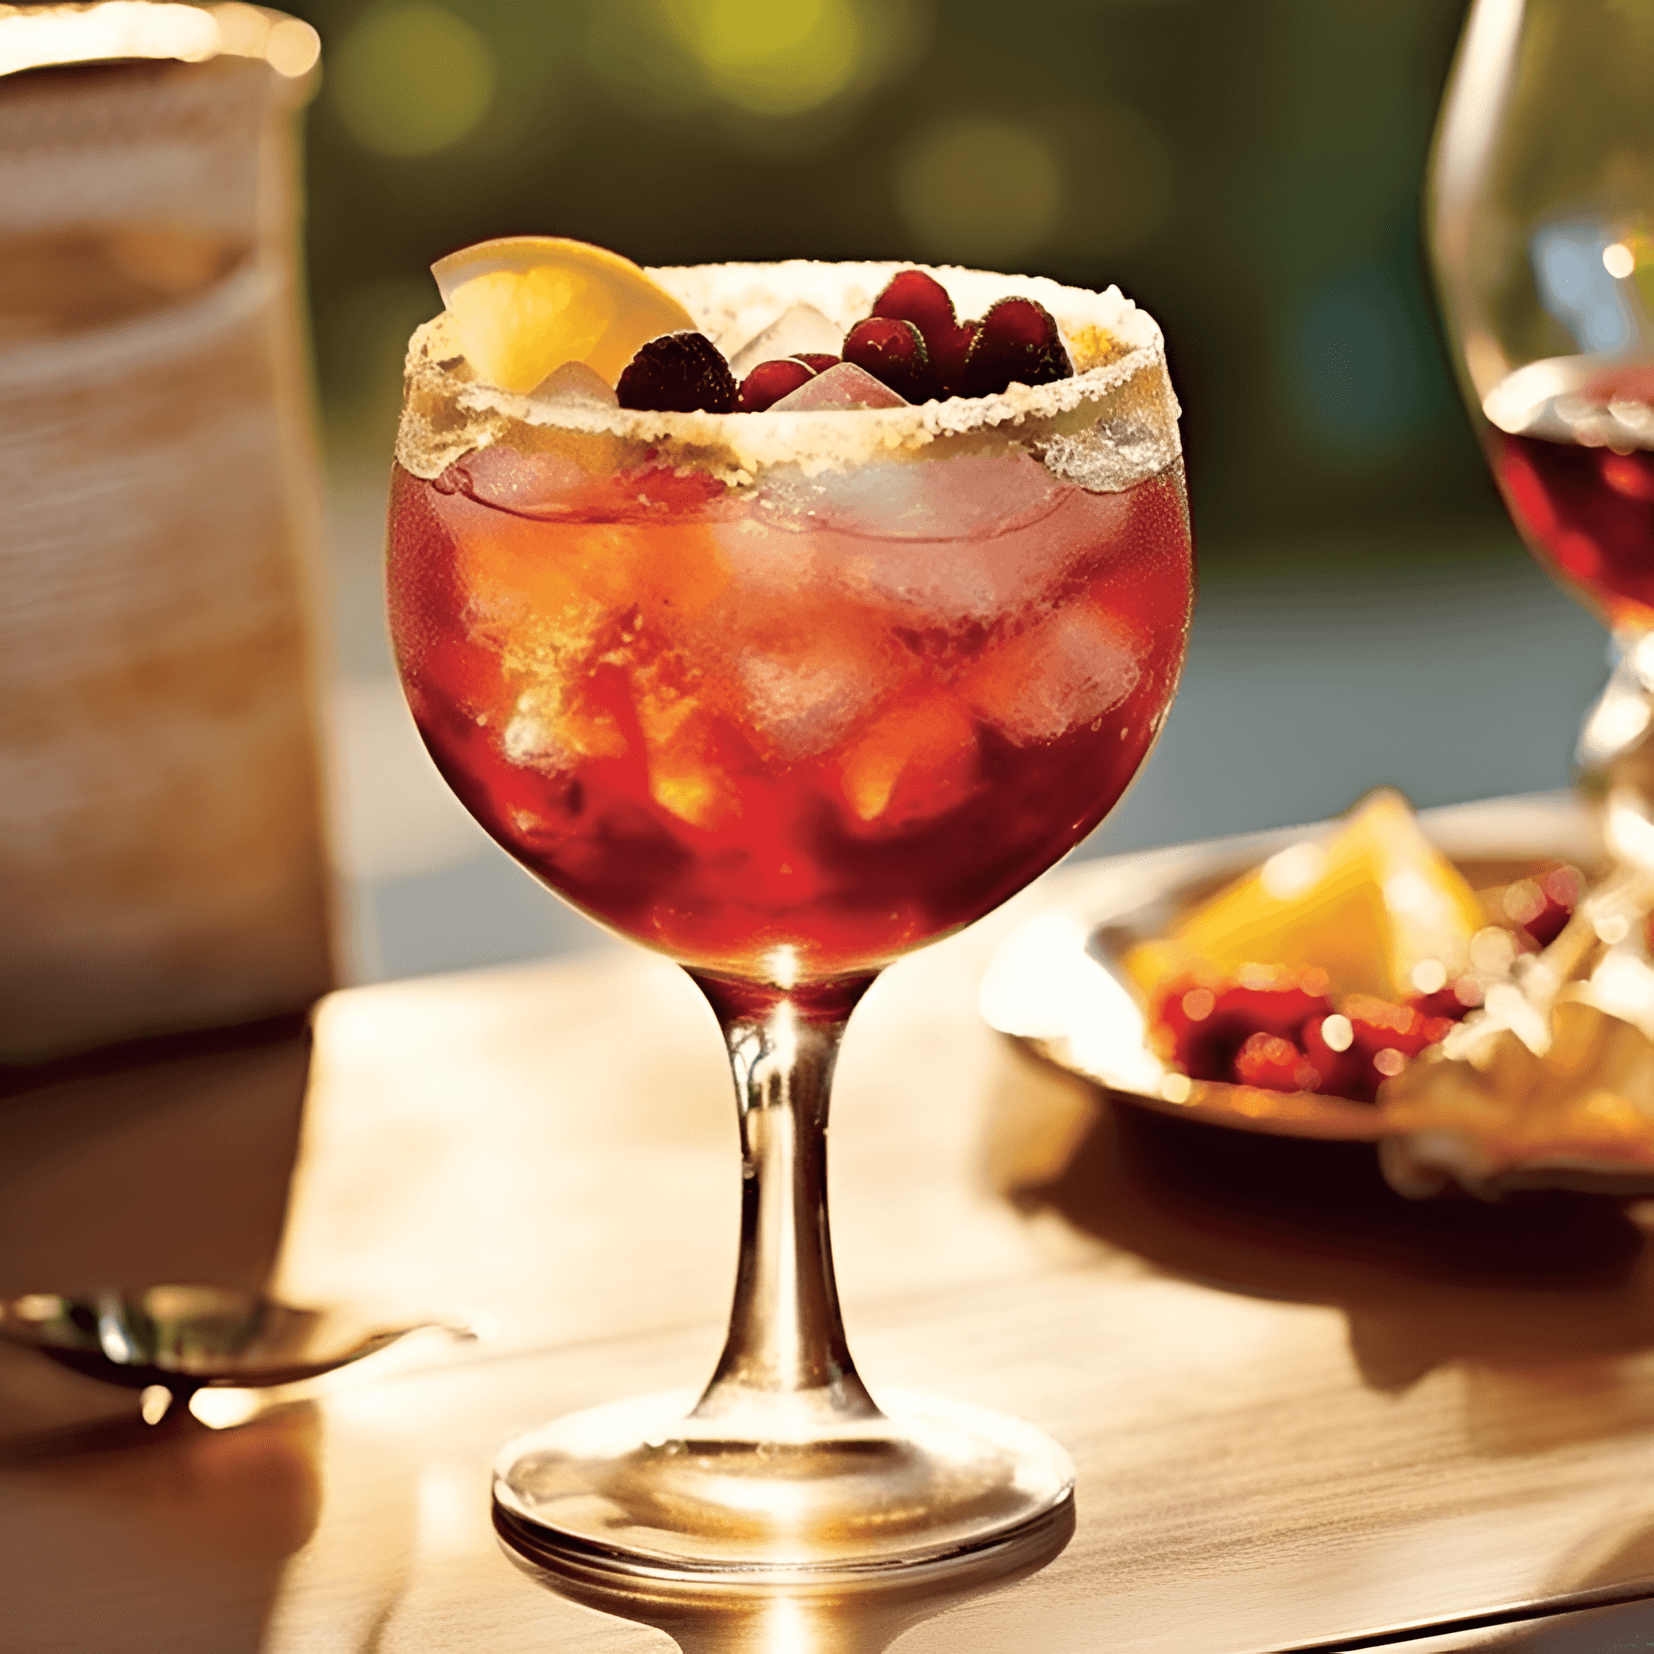 Port Wine Cobbler Cocktail Recipe - The Port Wine Cobbler has a rich, fruity, and slightly sweet taste with a hint of tartness. The combination of port wine, orange, and lemon creates a harmonious balance of flavors that is both refreshing and satisfying.